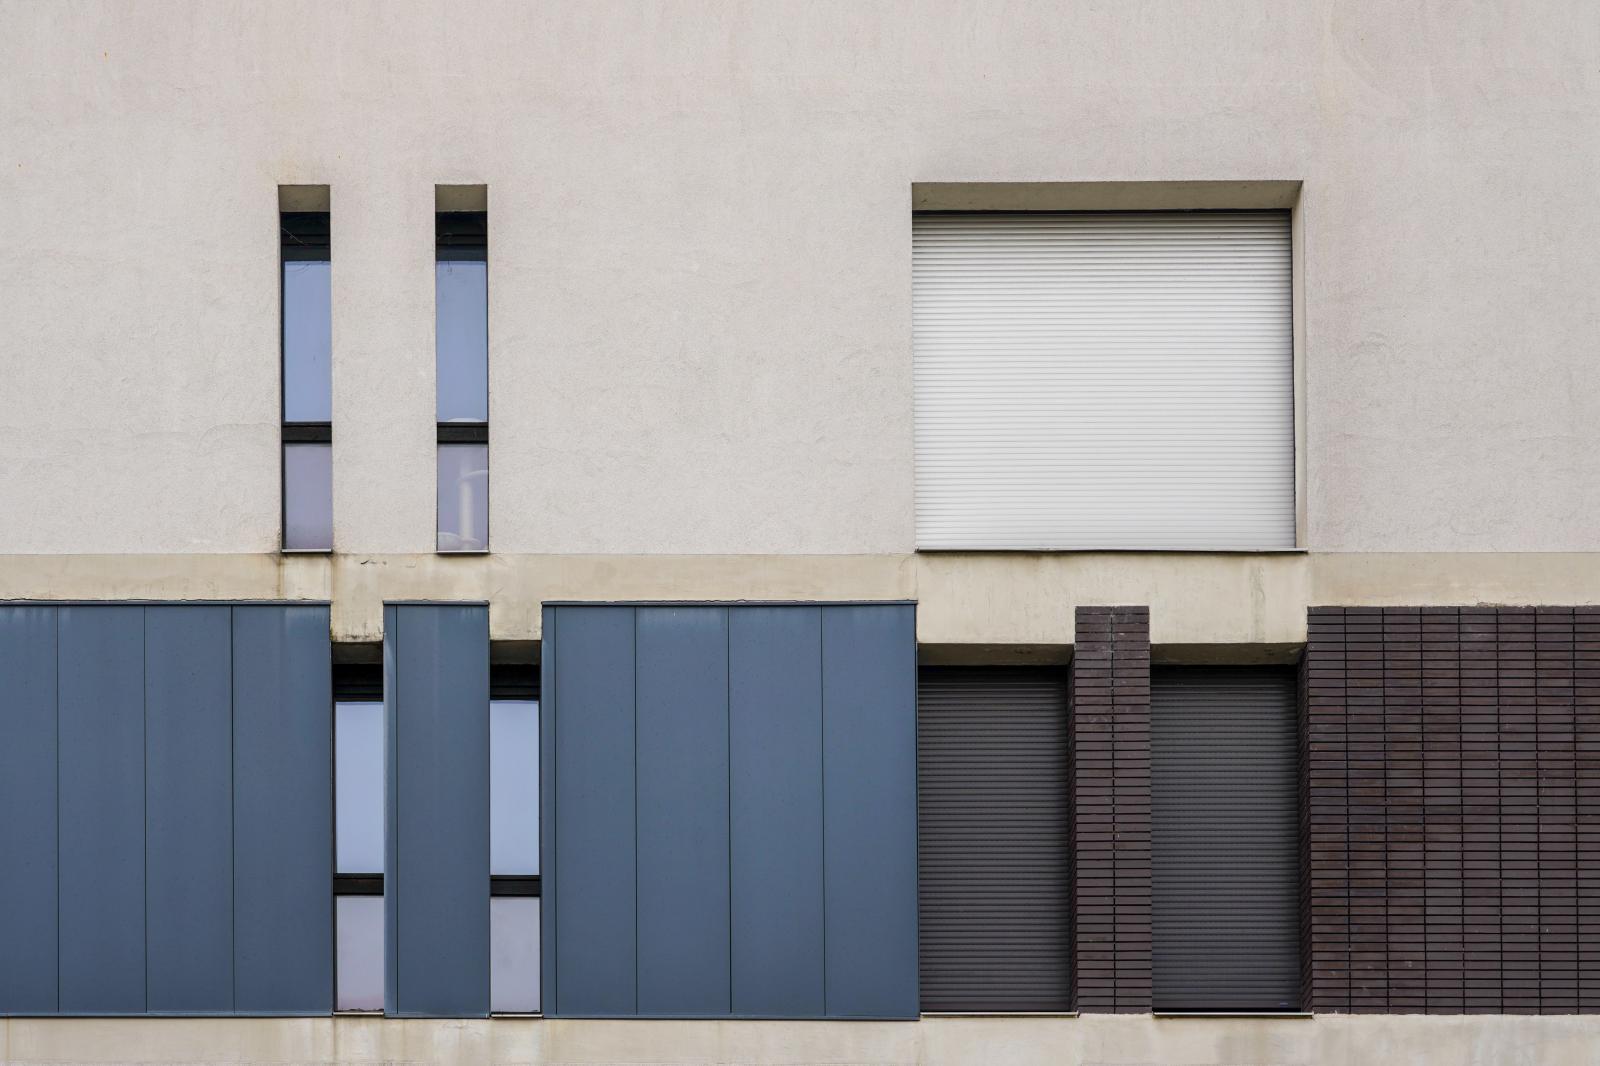 Image from New Photographs -  Grenoble, France  # 4280 4/2024 Facade Composition: A...